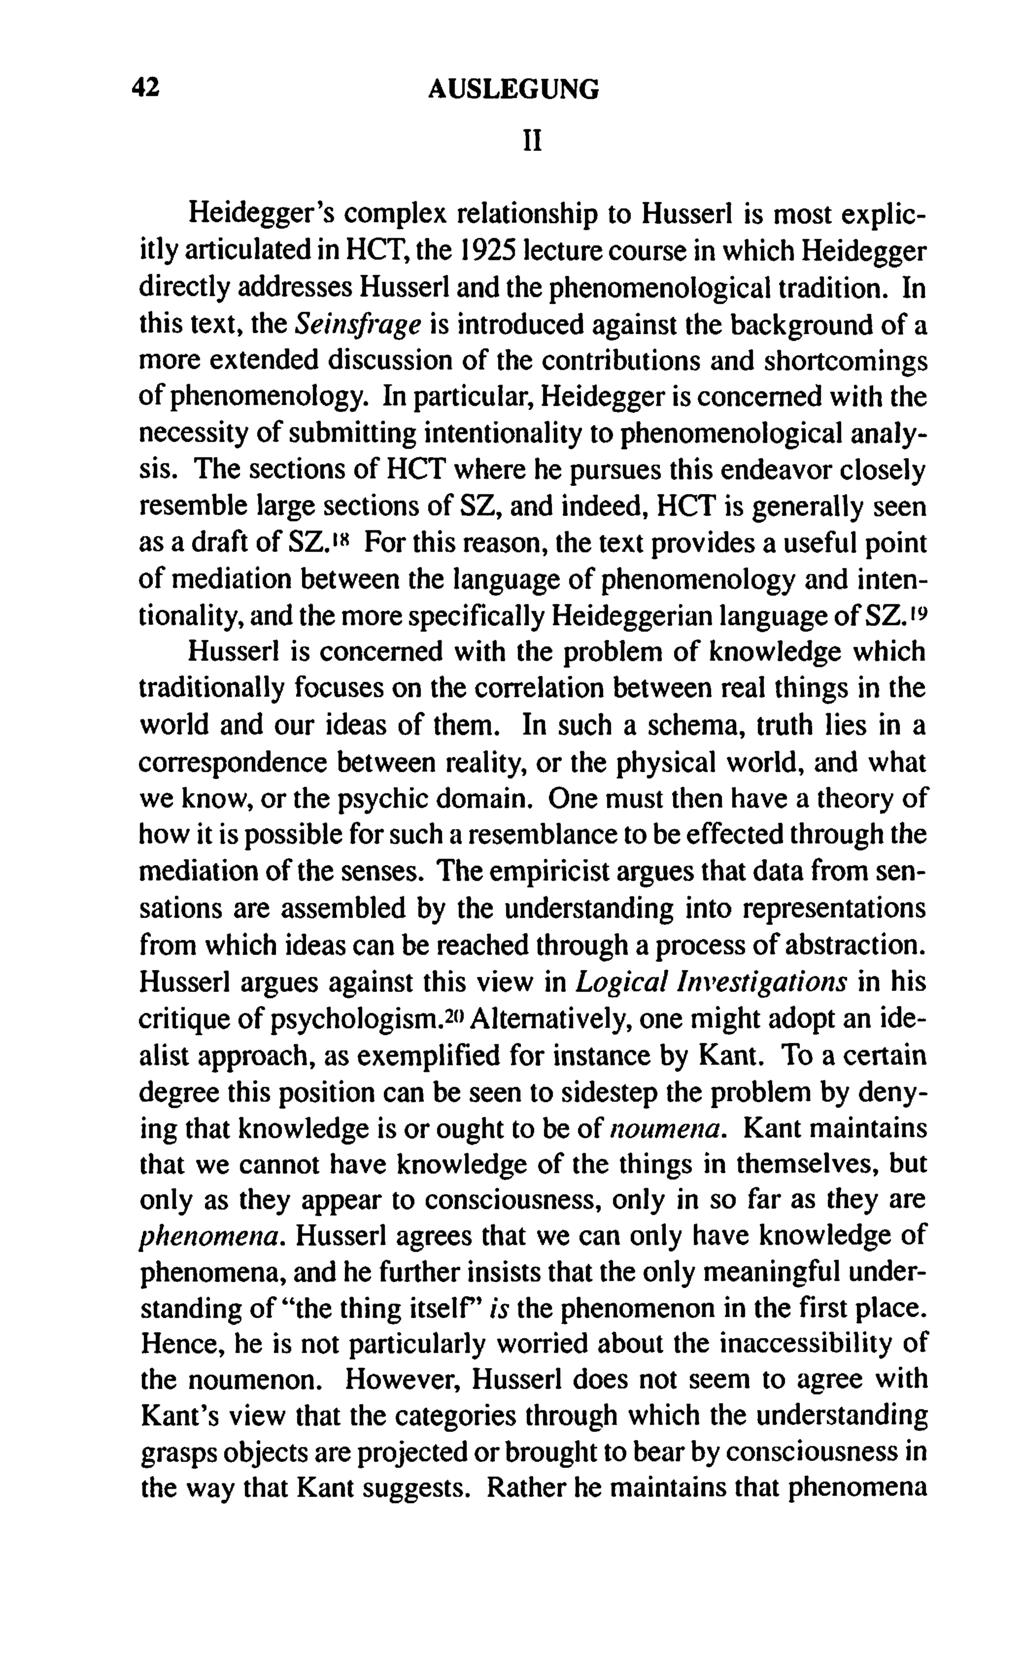 42 AUSLEGUNG II Heidegger's complex relationship to Husserl is most explicitly articulated in HCT, the 1925 lecture course in which Heidegger directly addresses Husserl and the phenomenological